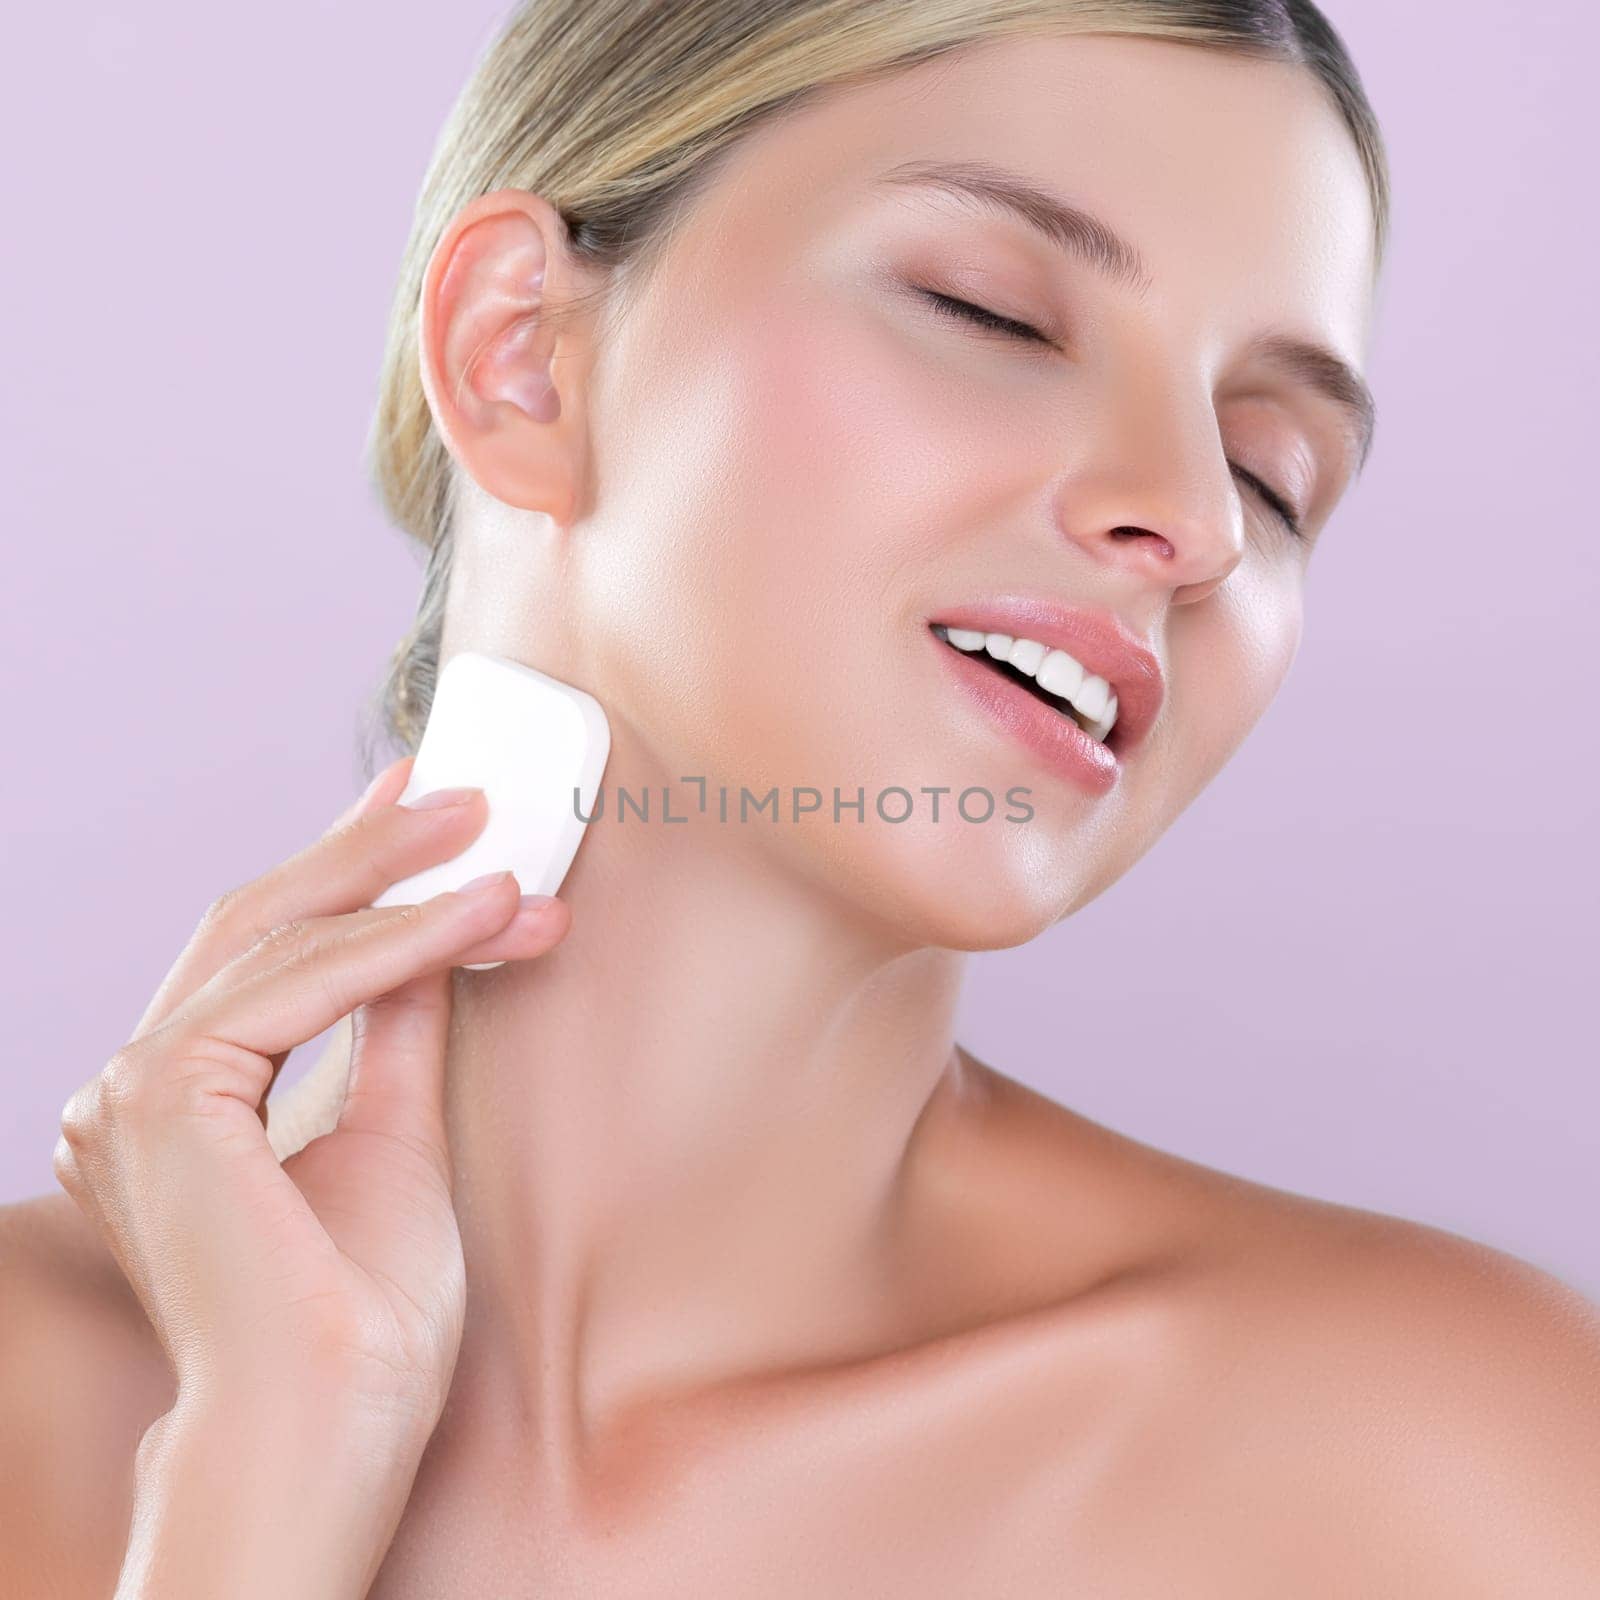 Closeup alluring beautiful female model applying powder puff for facial makeup concept. Portrait of flawless perfect cosmetic skin woman put powder foundation on her face in pink isolated background.